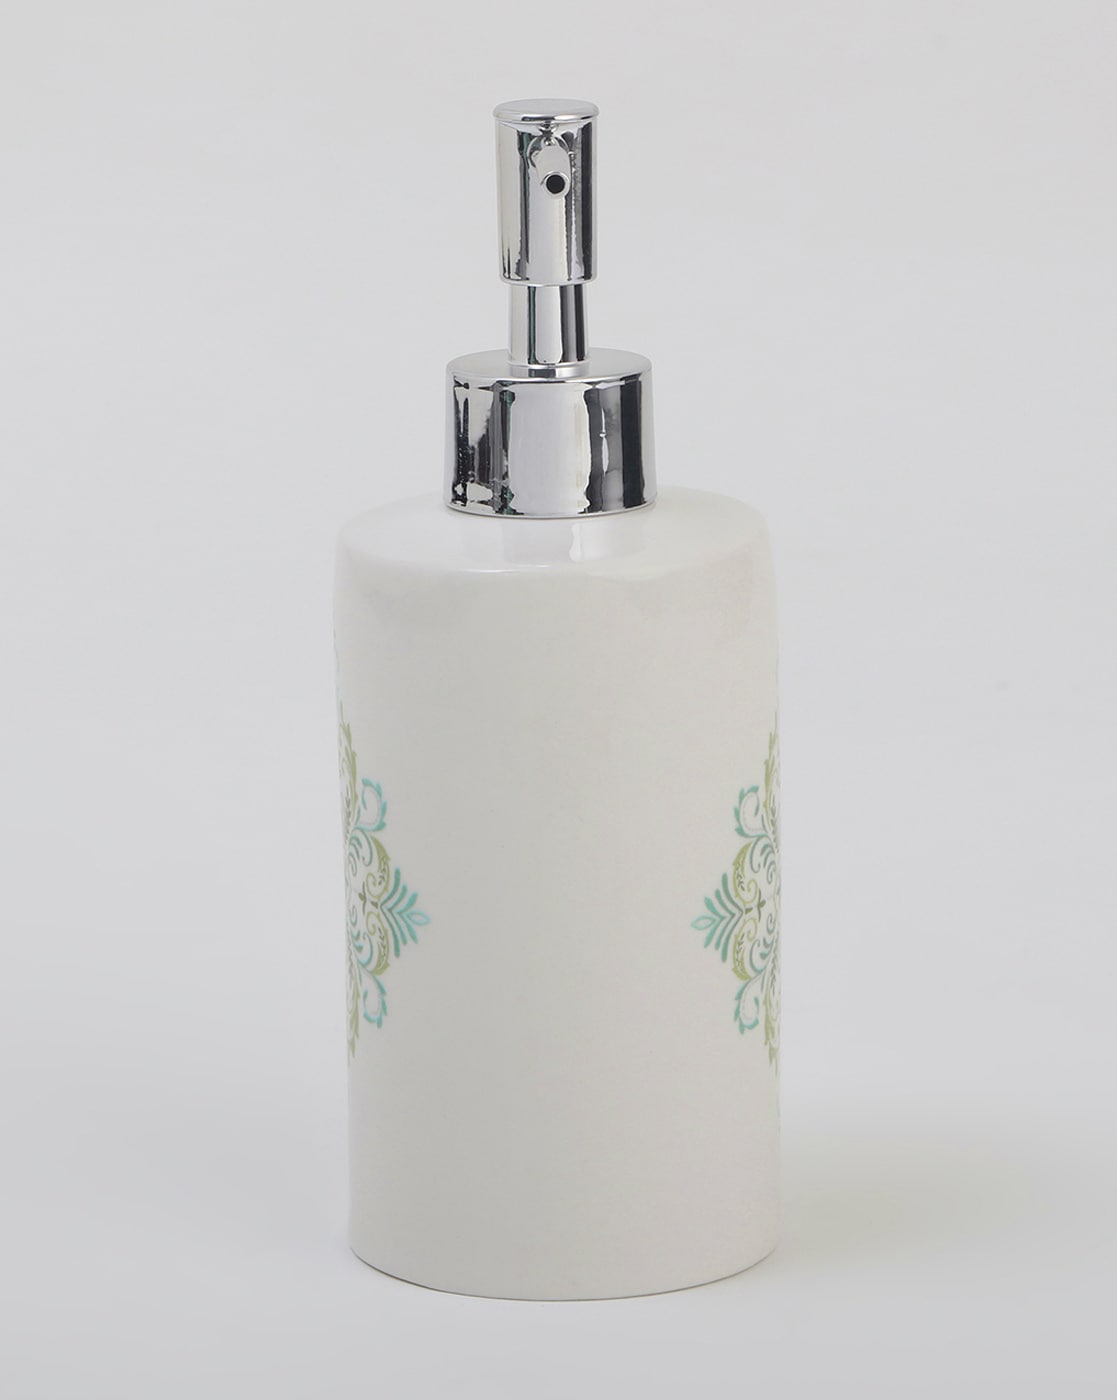 Buy Off White Ceramic Liquid Soap Dispenser - Stone Finish, Bath  Accessories at the best price on Monday, February 26, 2024 at 8:43 am +0530  with latest offers in India. Get Free